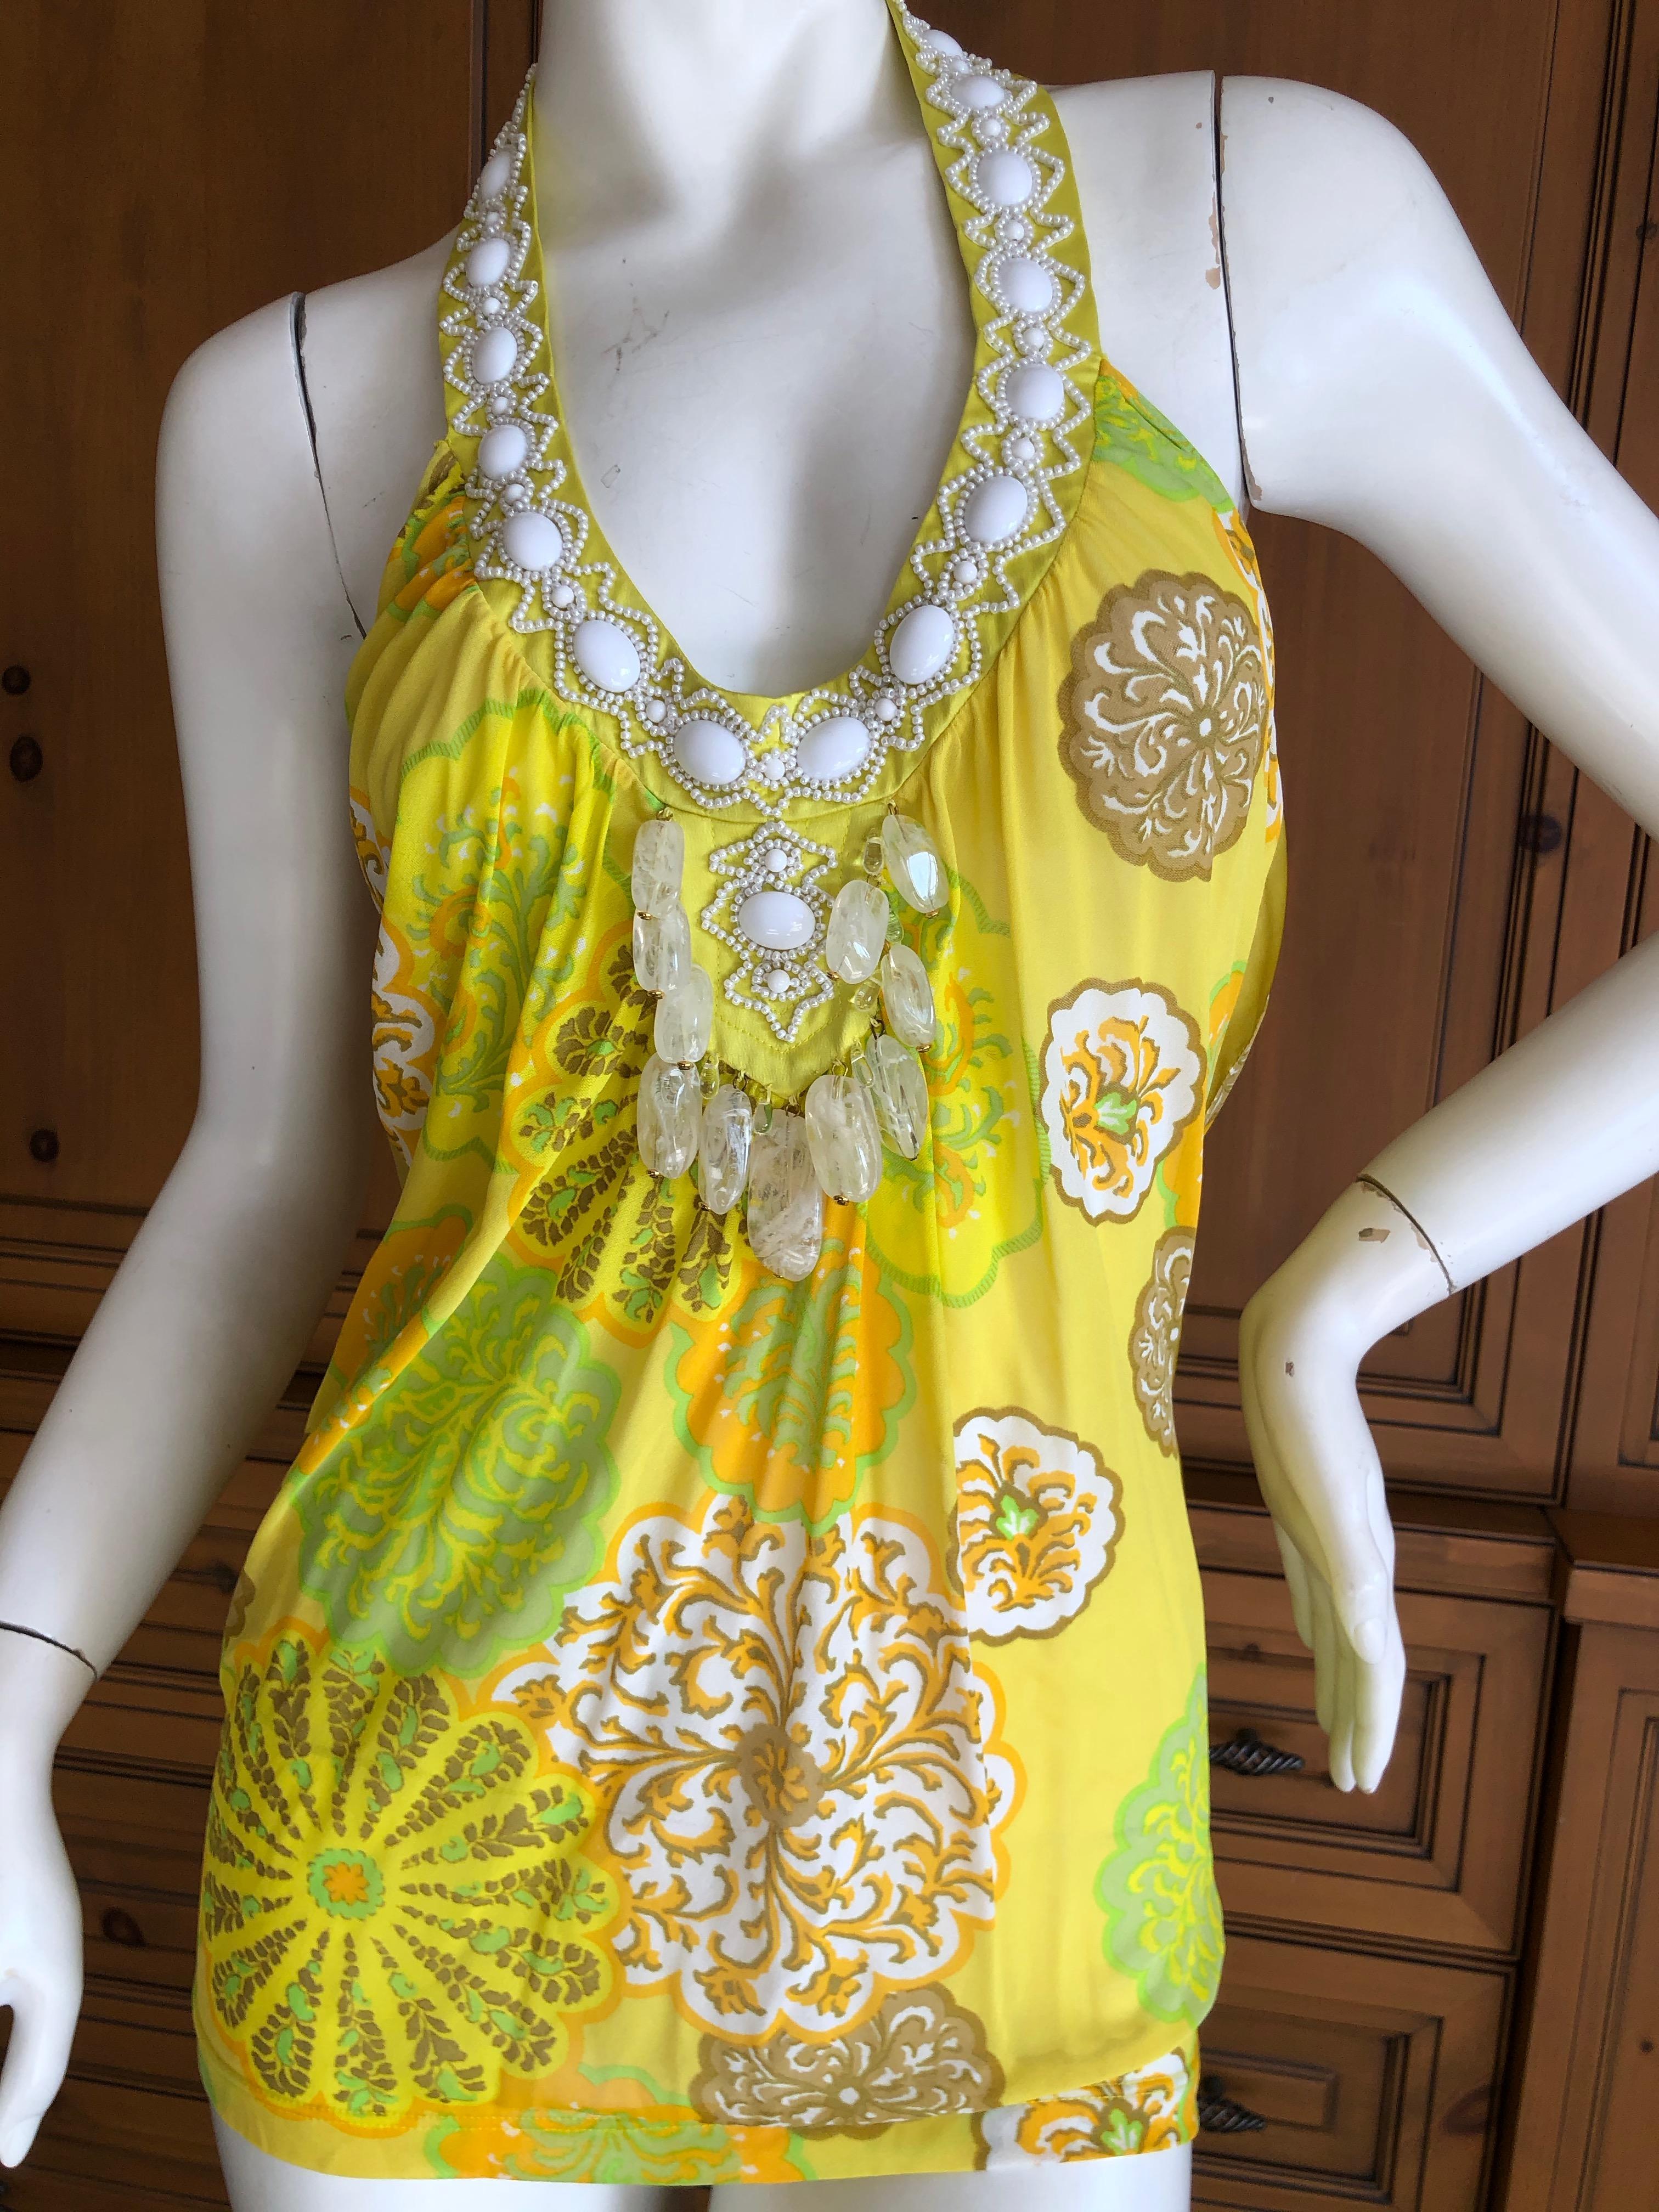 Emanuel Ungaro Silk Sleeveless Top with Jeweled Neckline by Peter Dundas In Excellent Condition For Sale In Cloverdale, CA